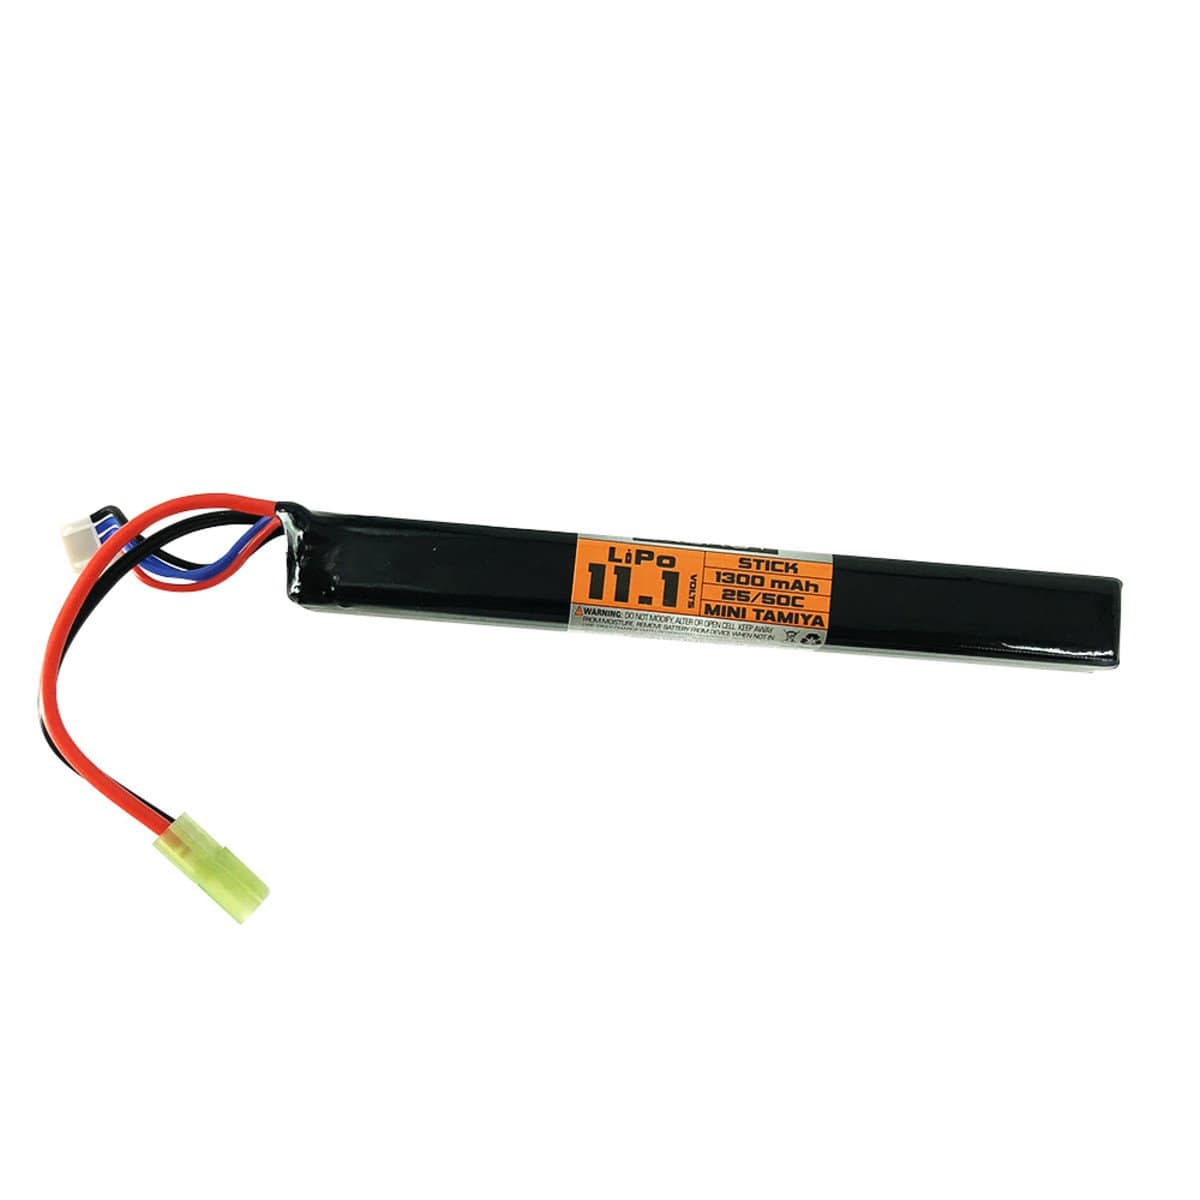 Valken Airsoft Battery - LiPo 11.1V 1300mAh 25/50c Stick Style - Eminent Paintball And Airsoft